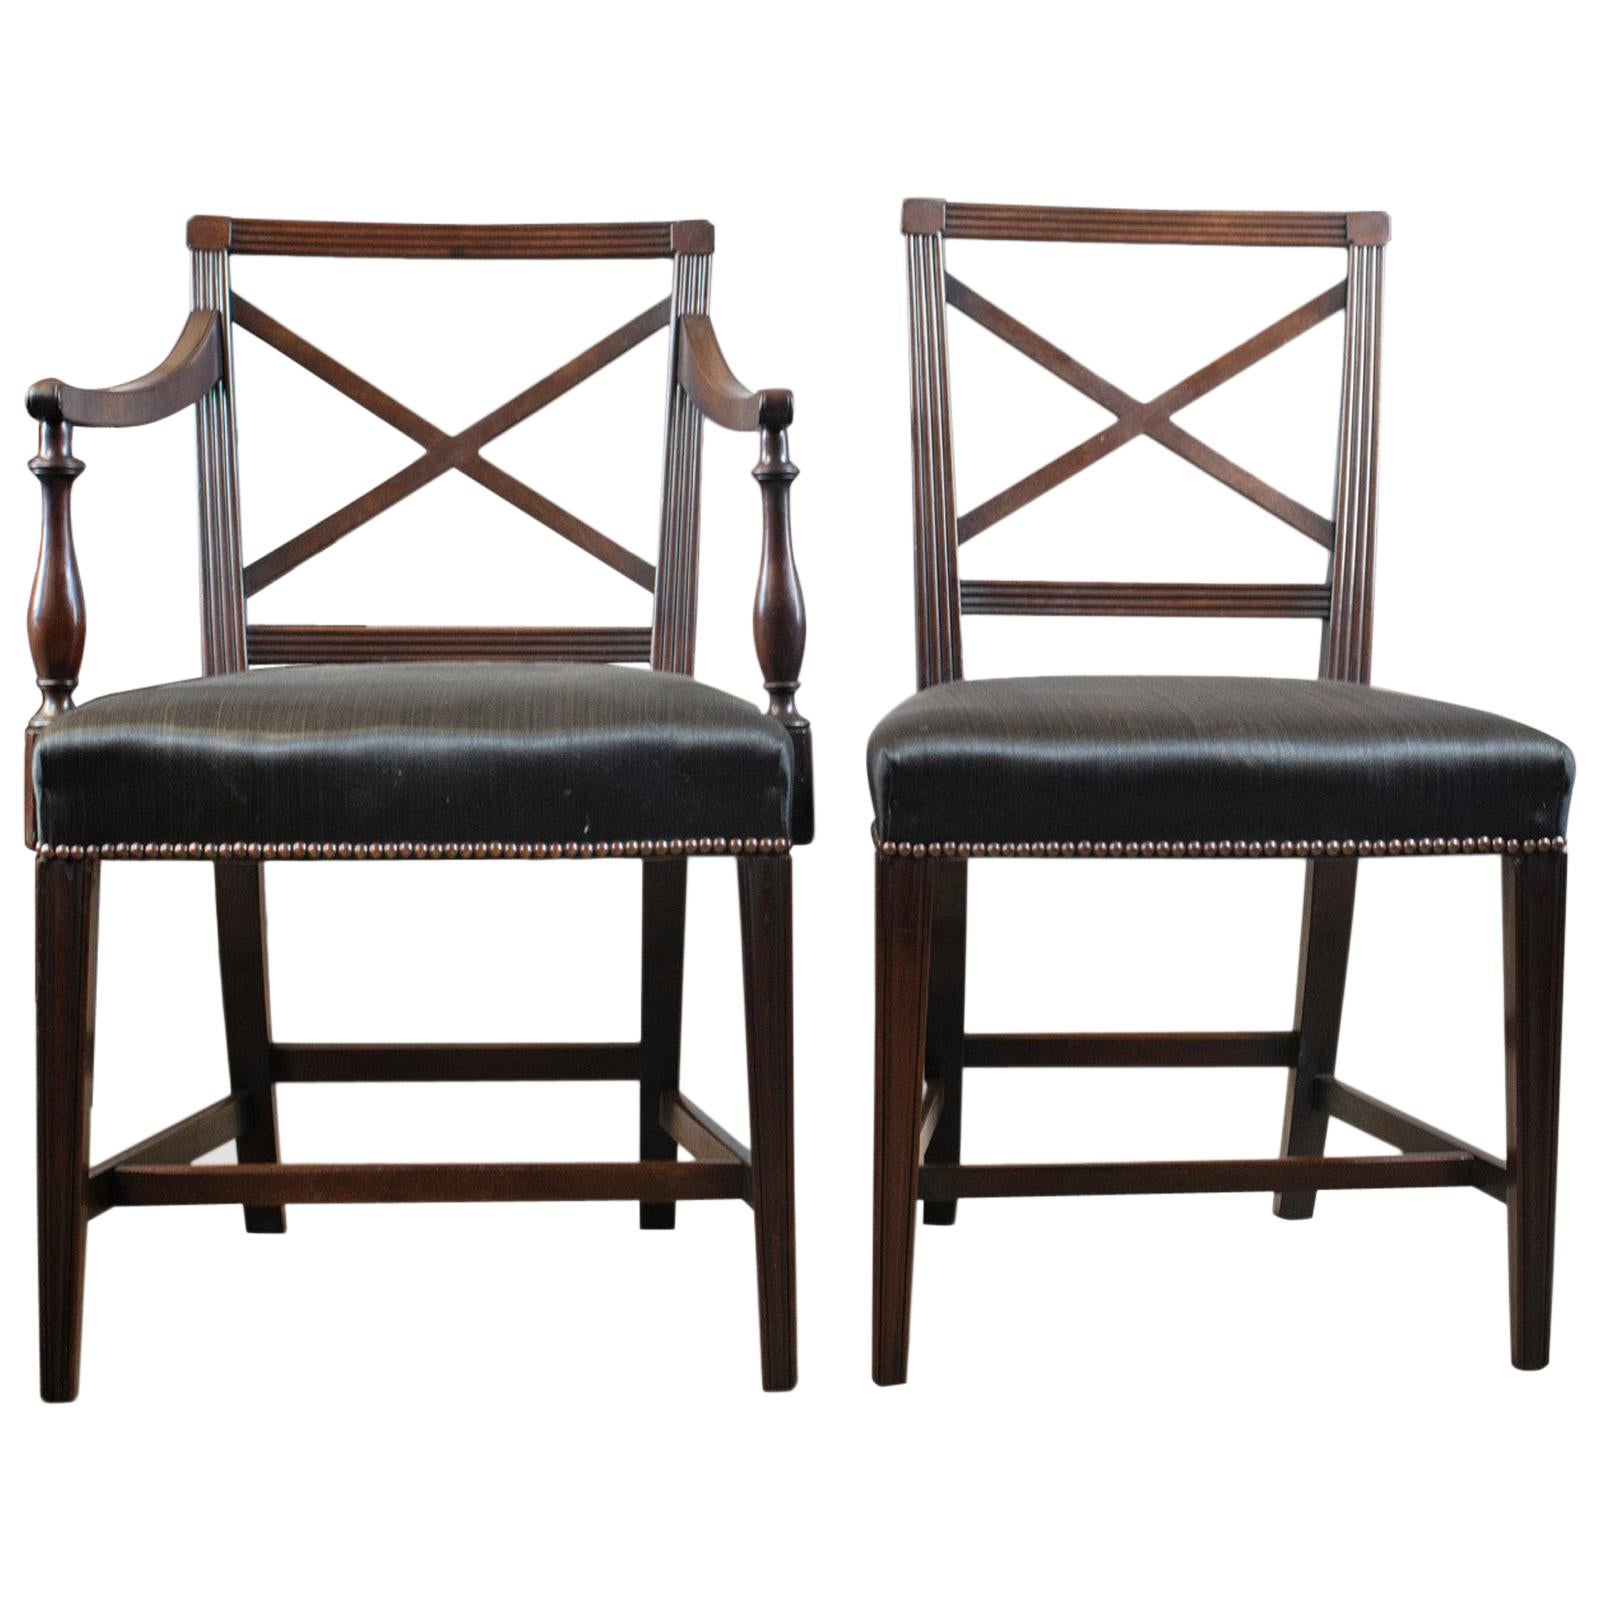 9 Antique Dining Chairs, 2 x Carvers, 6 Plus 1 Spare Side, Regency, circa 1815